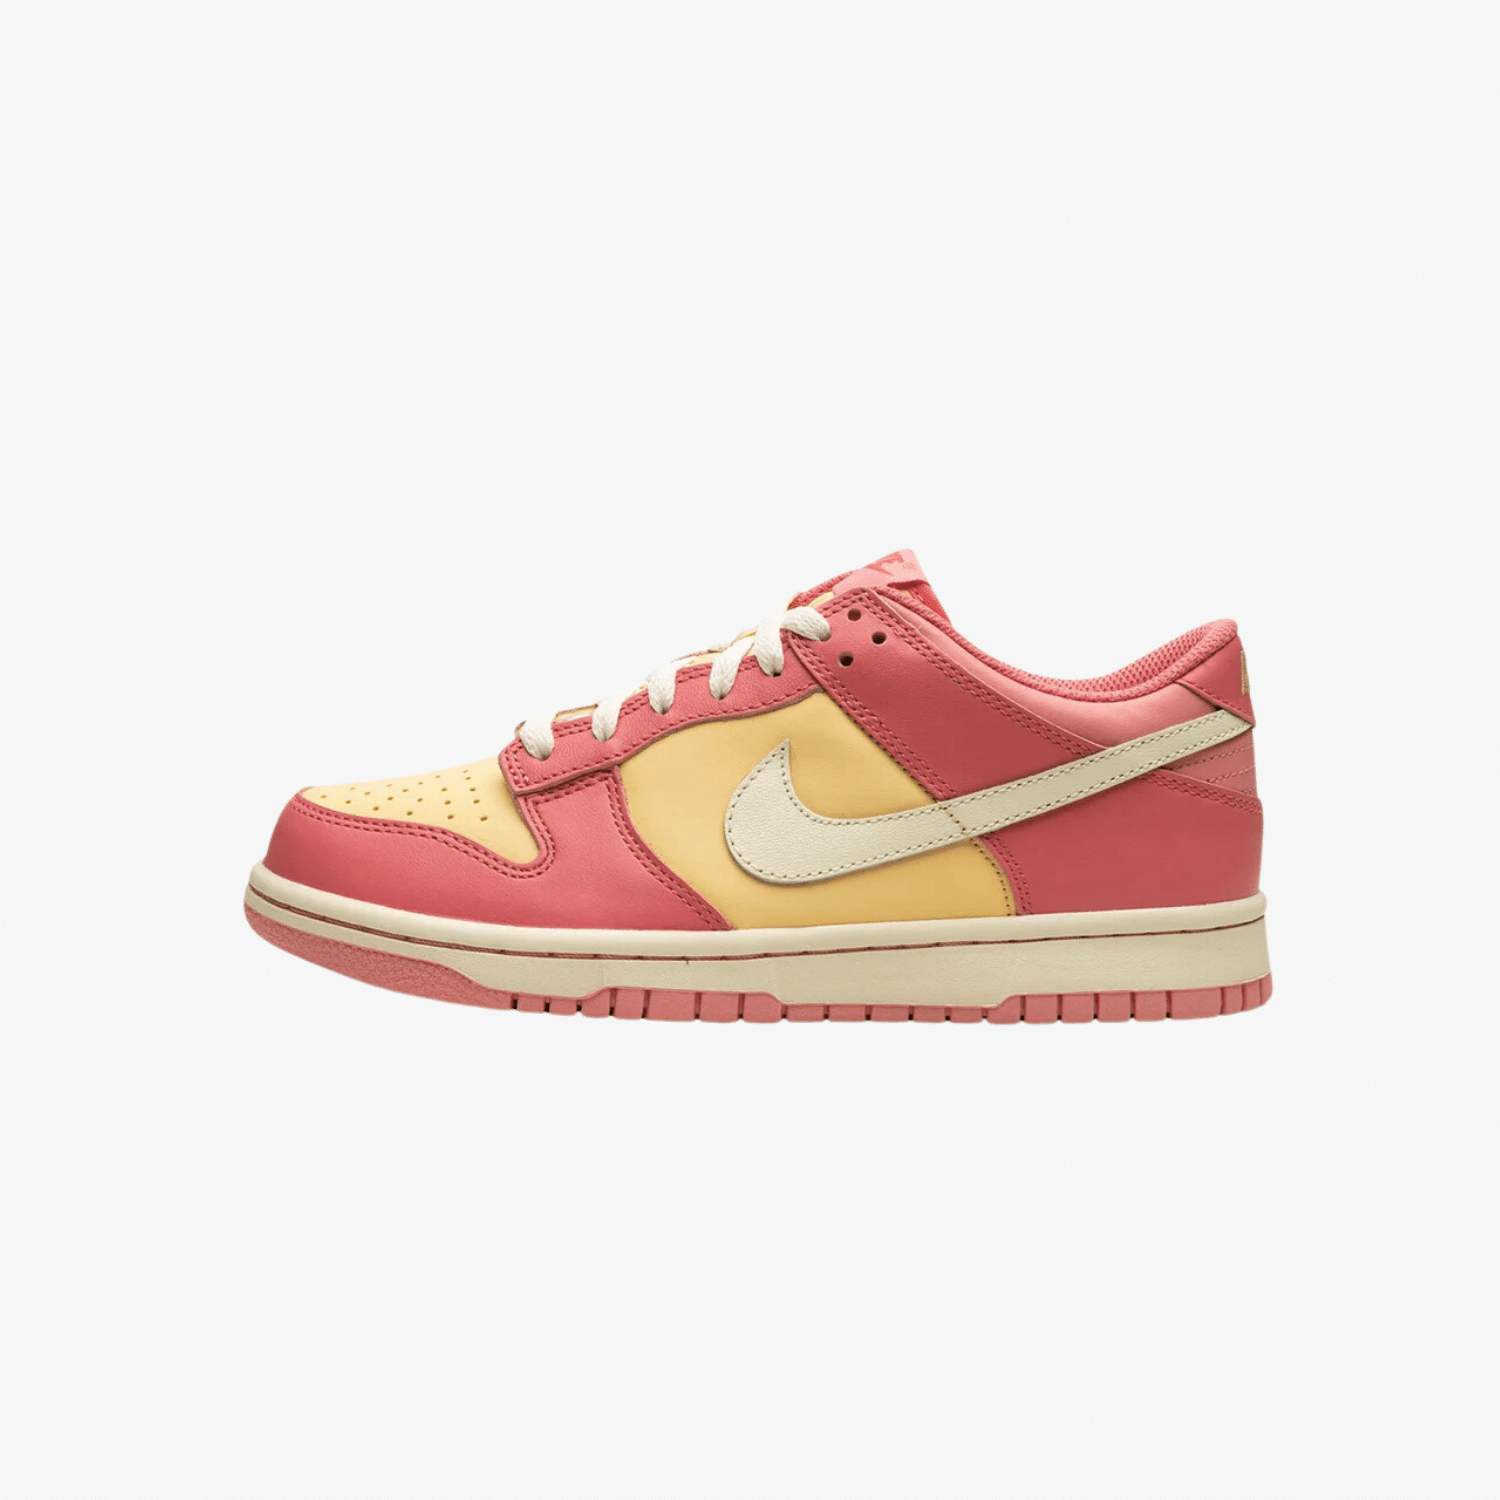     nike-dunk-low-strawberry-cream-DH9765-200-unfazed-1